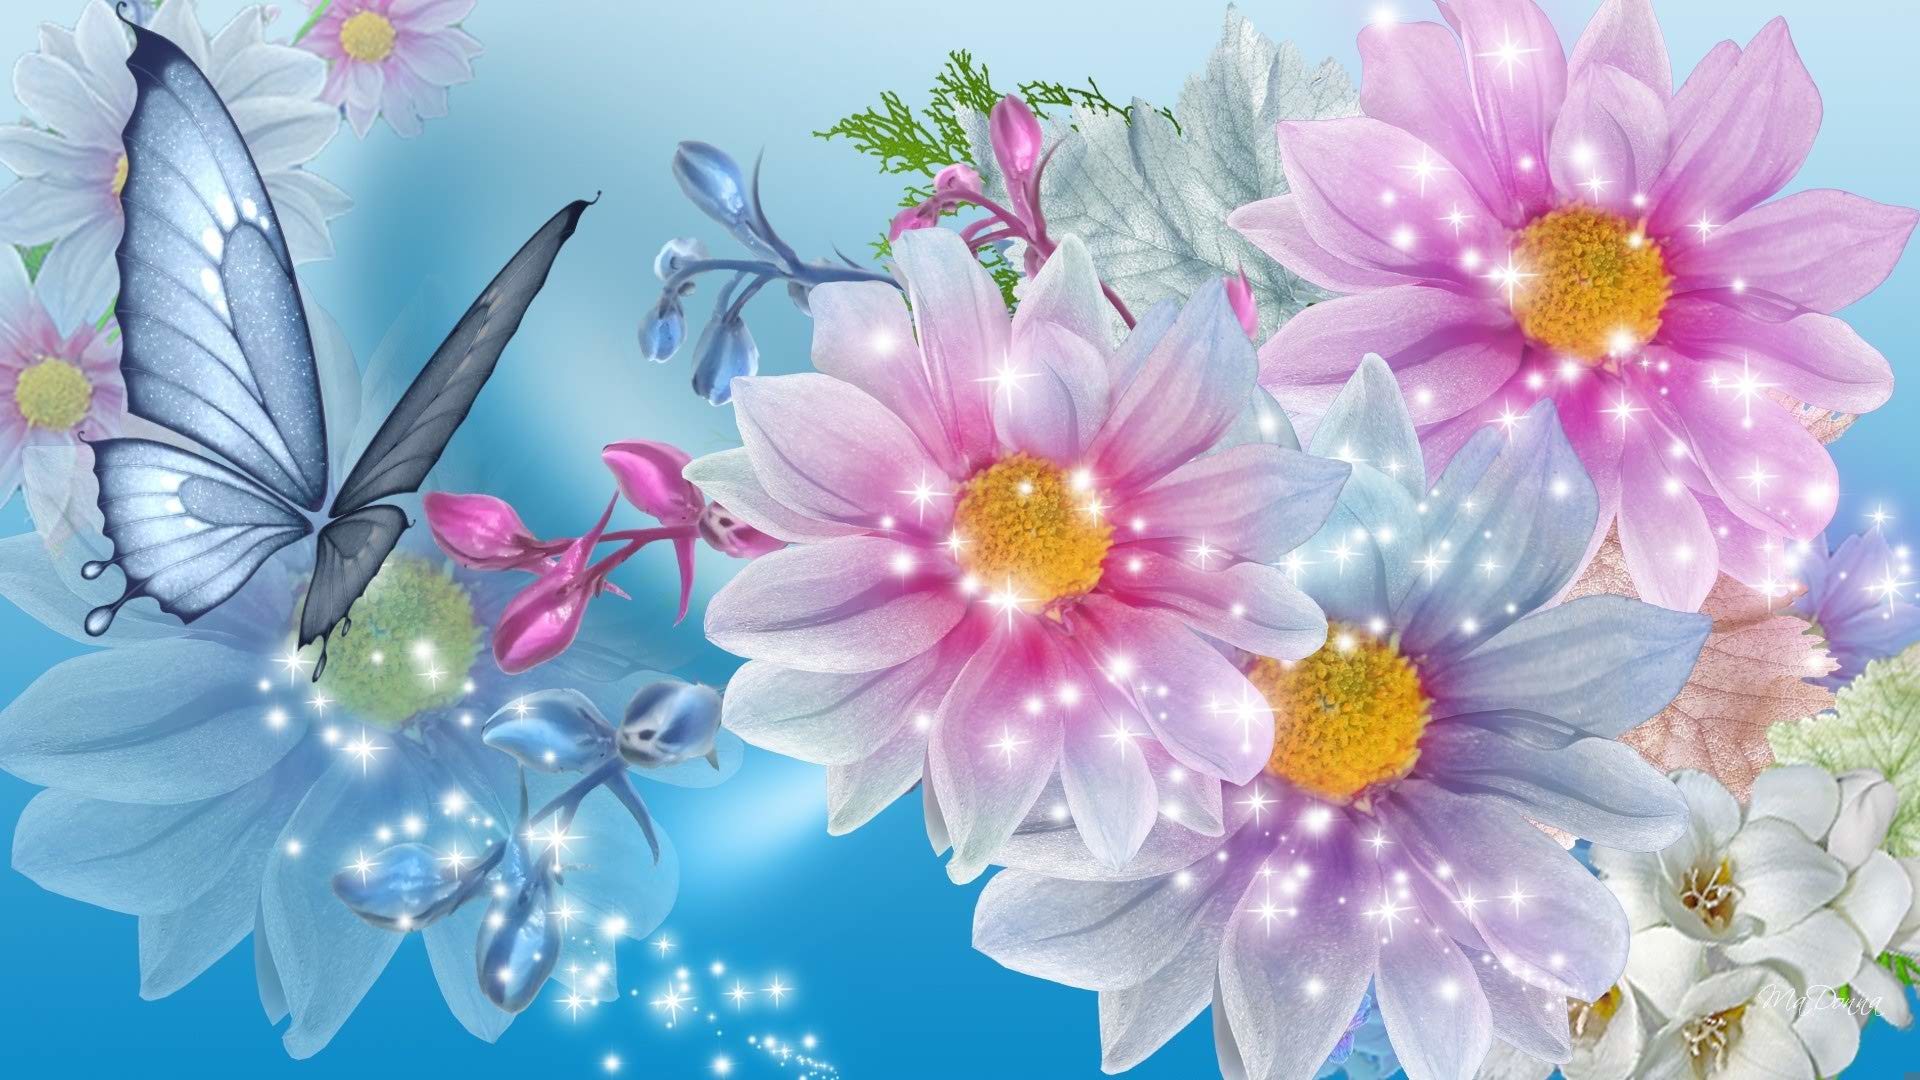 1920x1080 Beautiful Flowers Images Collection 1600Ã1200 Beautiful Flowers .